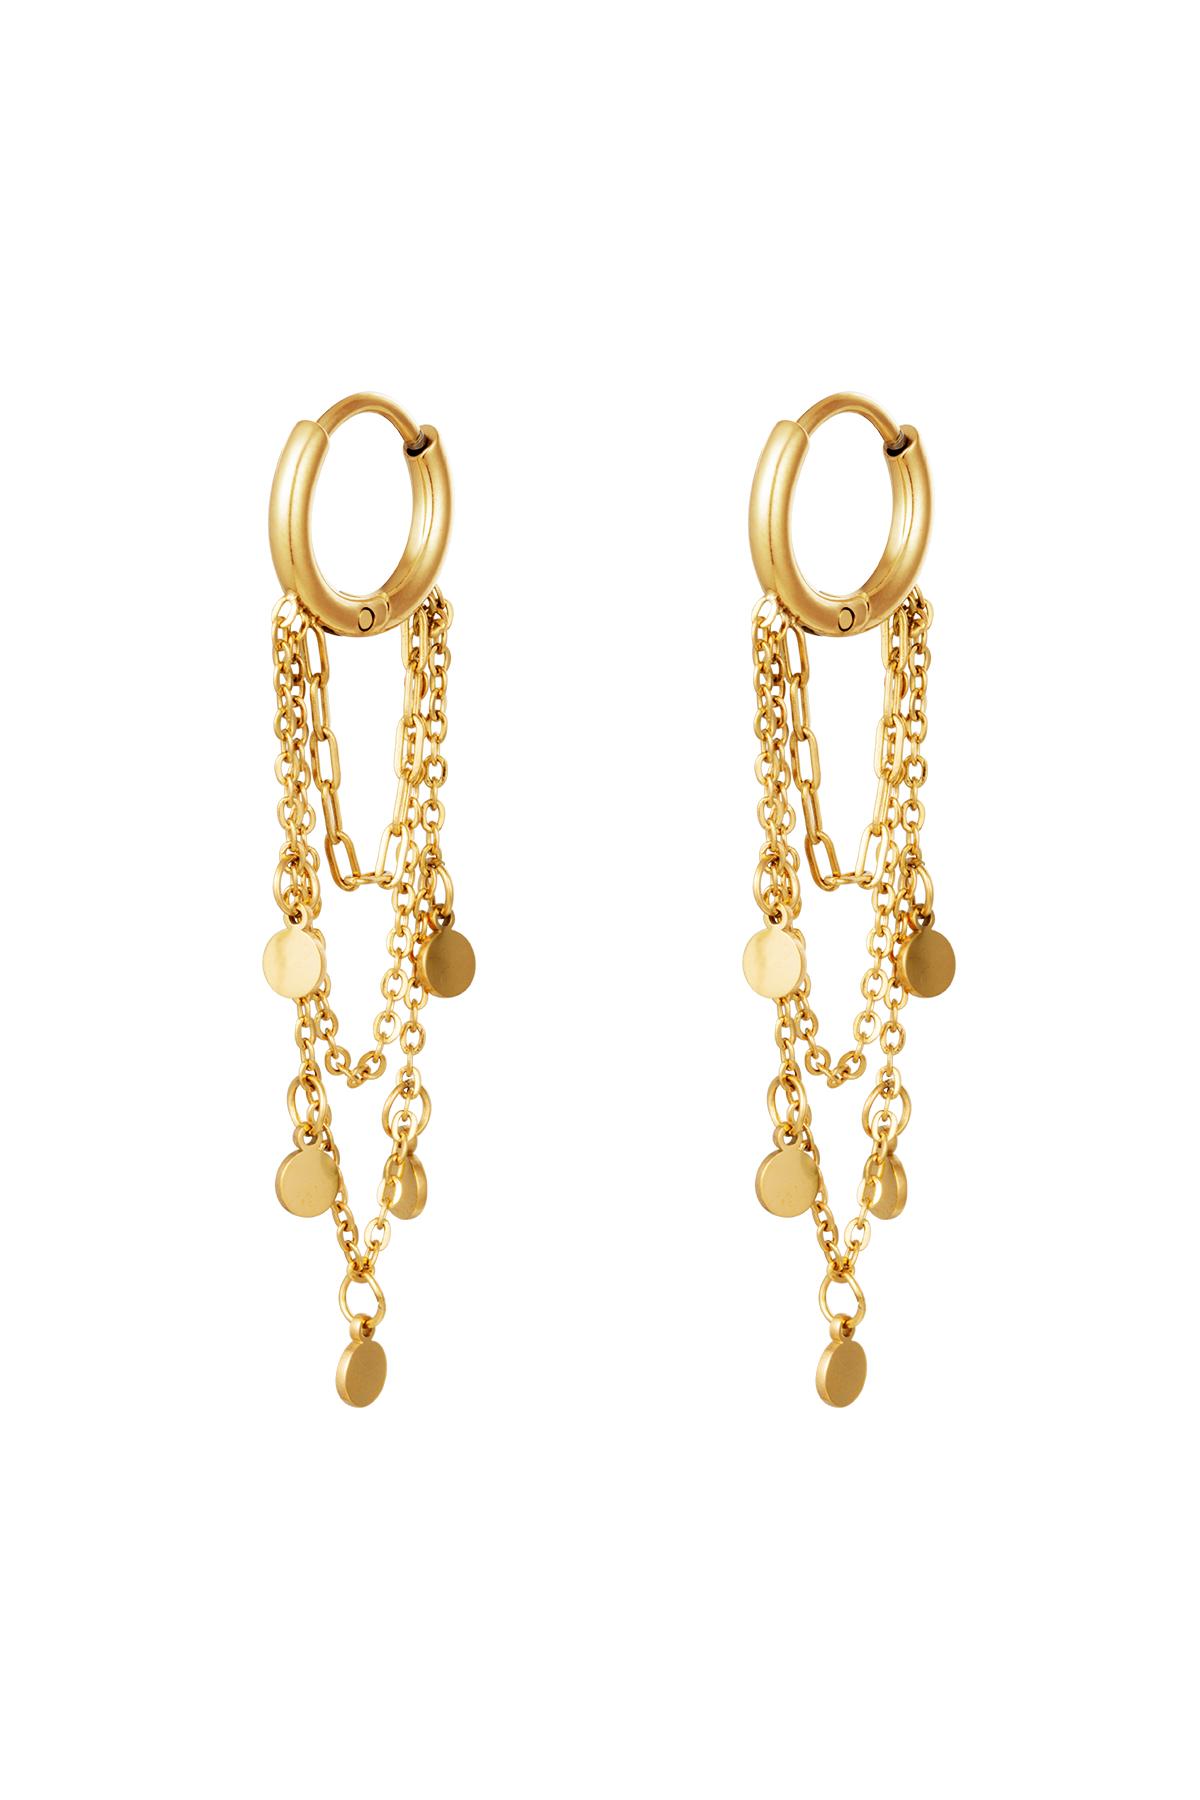 Earrings Garlands Gold Stainless Steel h5 